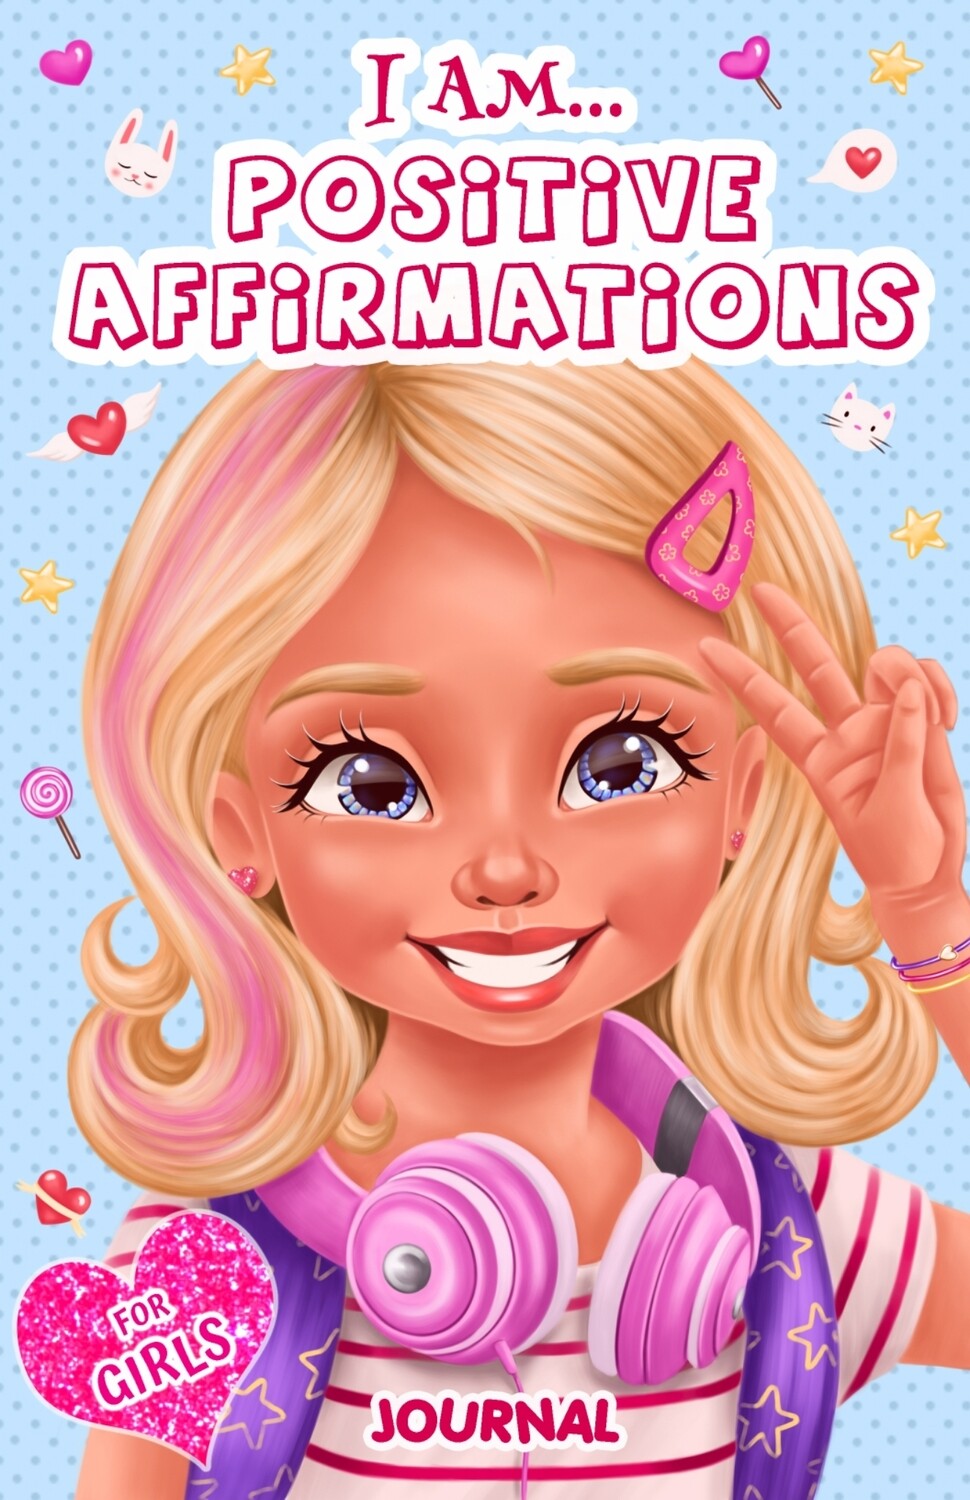 I Am... Positive Affirmations Journal For Girls: A Journal to Help Girls Build Positive Attitude, Confidence and Mindfulness ISBN 978-1838186777 By Habi Akinteye 